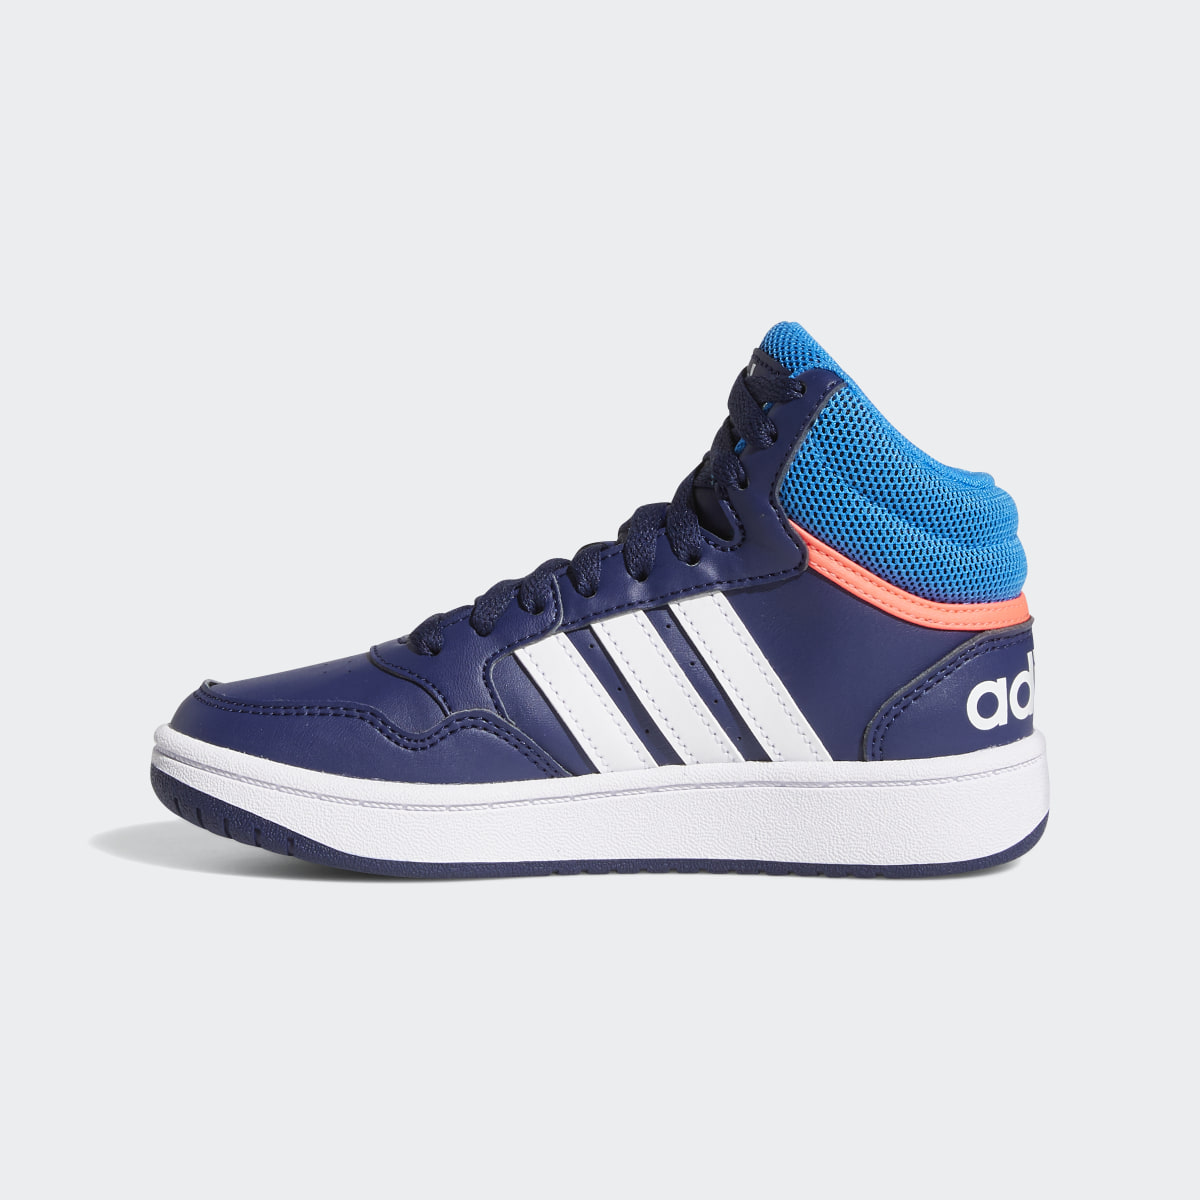 Adidas Hoops Mid Shoes. 7